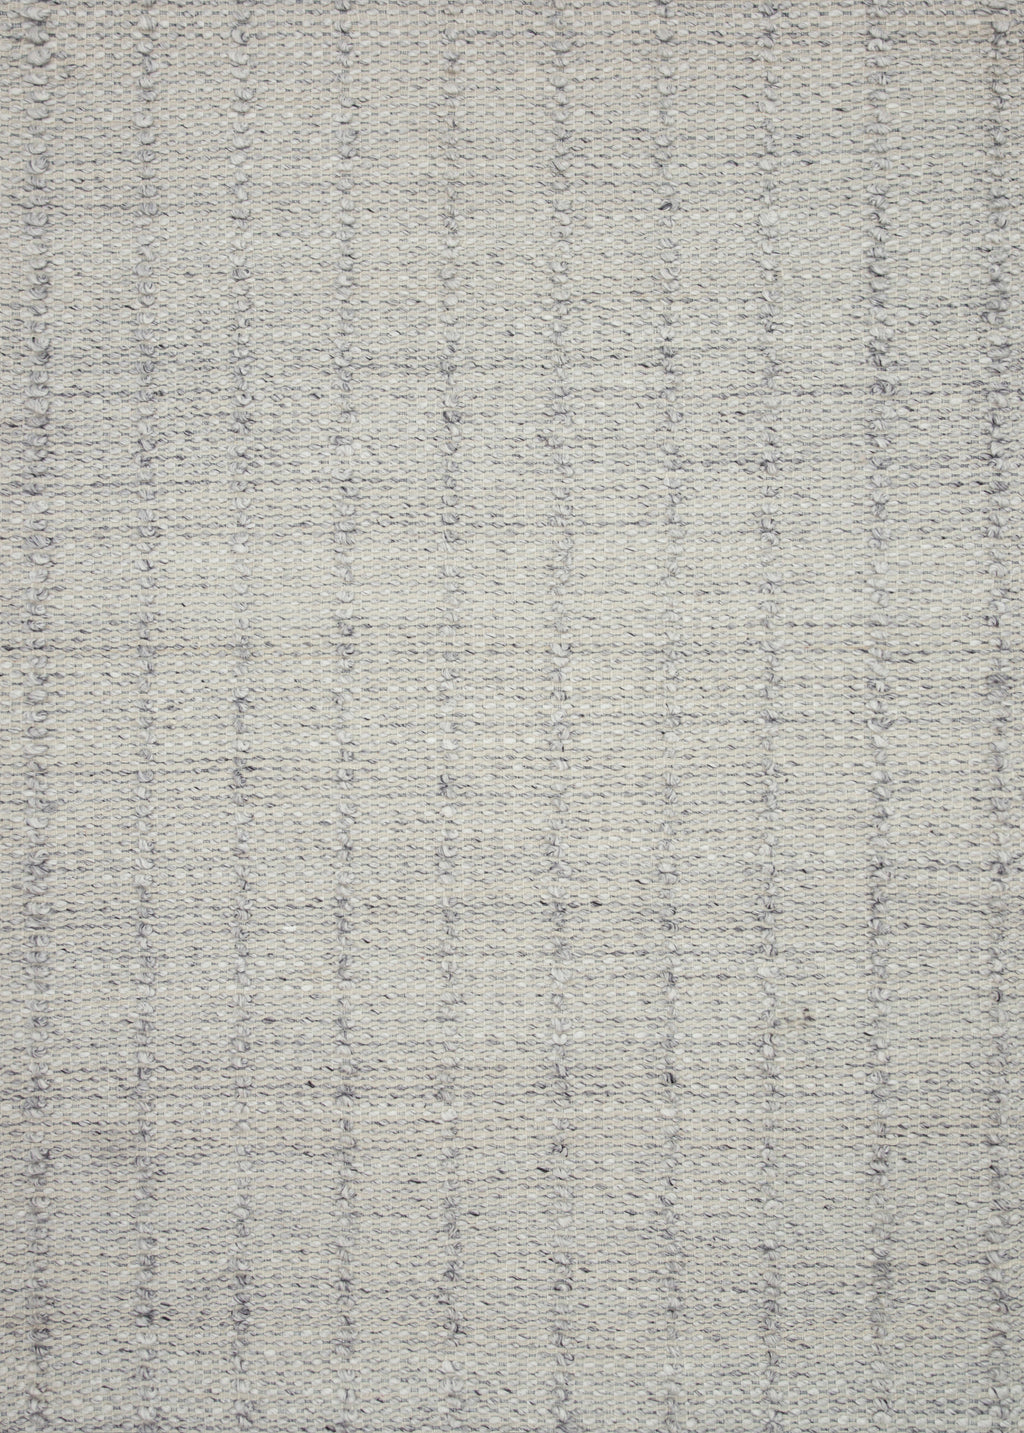 ELLISTON Collection Wool Rug  in  LT GREY Gray Accent Hand-Woven Wool